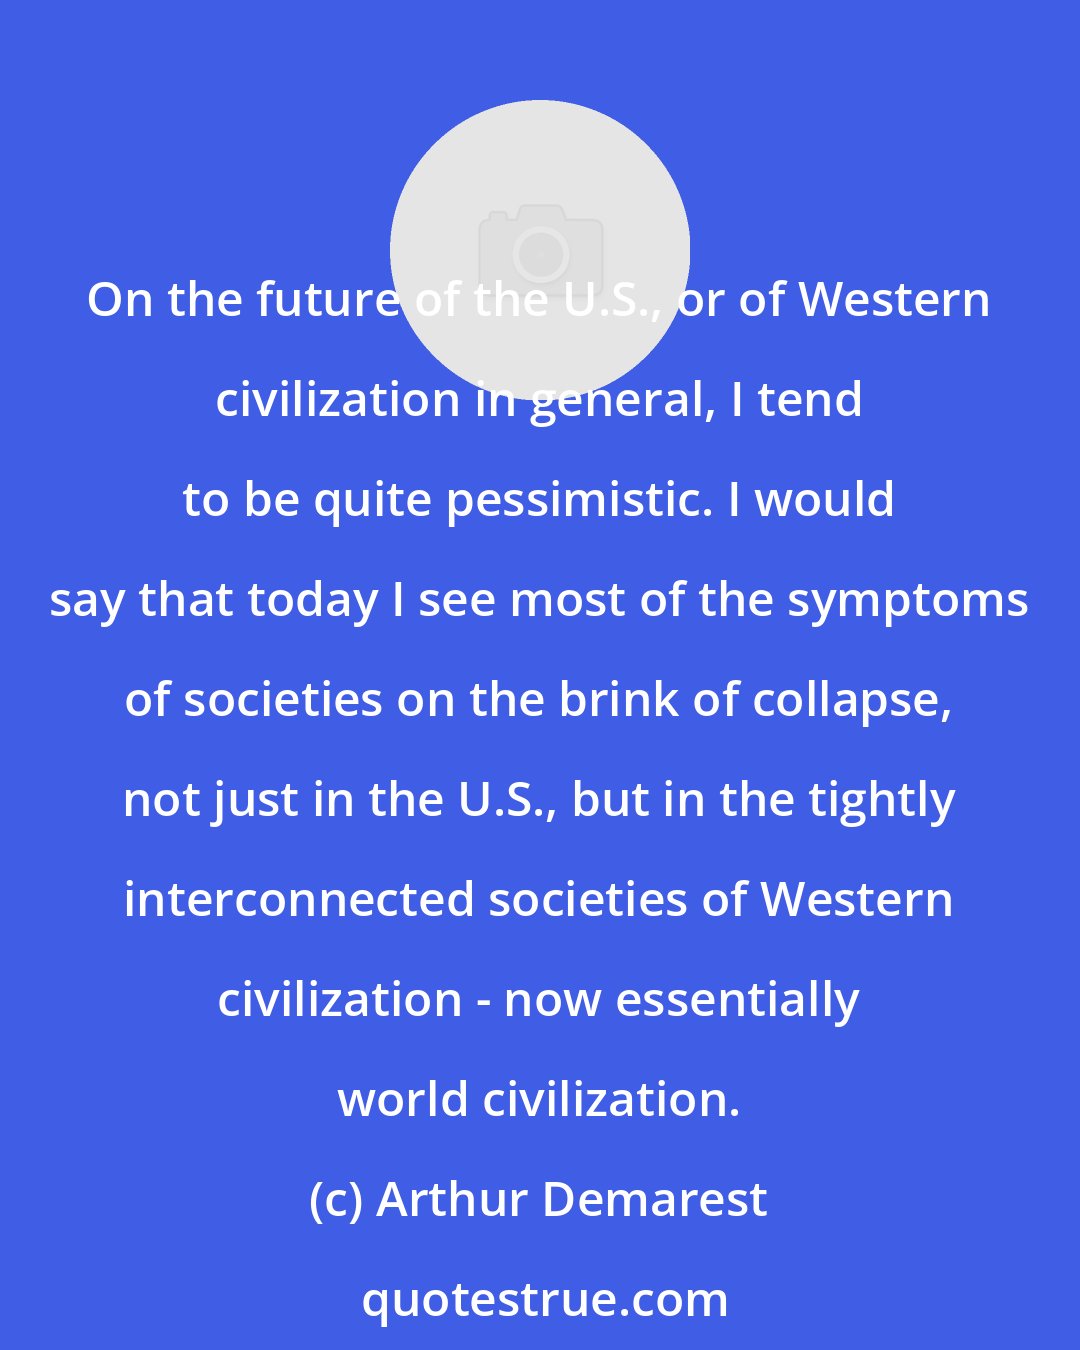 Arthur Demarest: On the future of the U.S., or of Western civilization in general, I tend to be quite pessimistic. I would say that today I see most of the symptoms of societies on the brink of collapse, not just in the U.S., but in the tightly interconnected societies of Western civilization - now essentially world civilization.